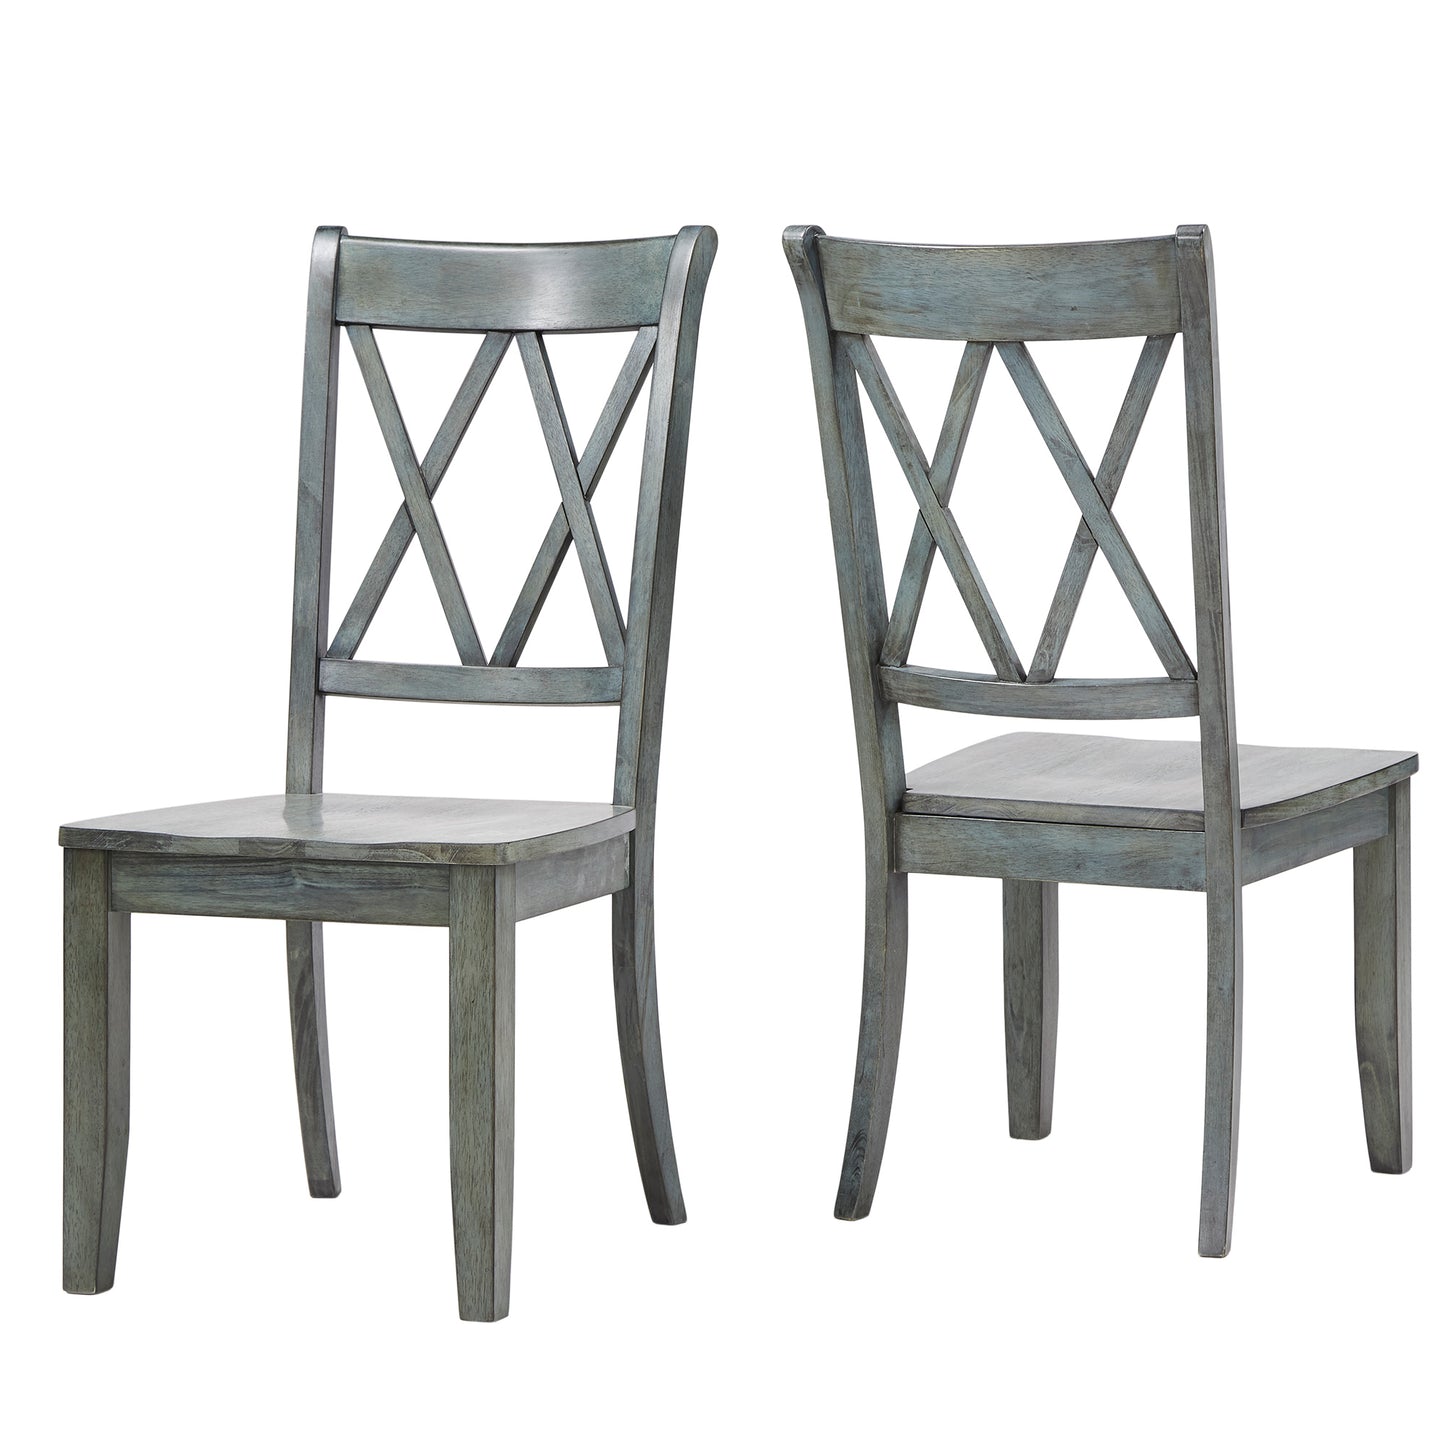 Double X Back Wood Dining Chairs (Set of 2) - Antique Sage Green Finish